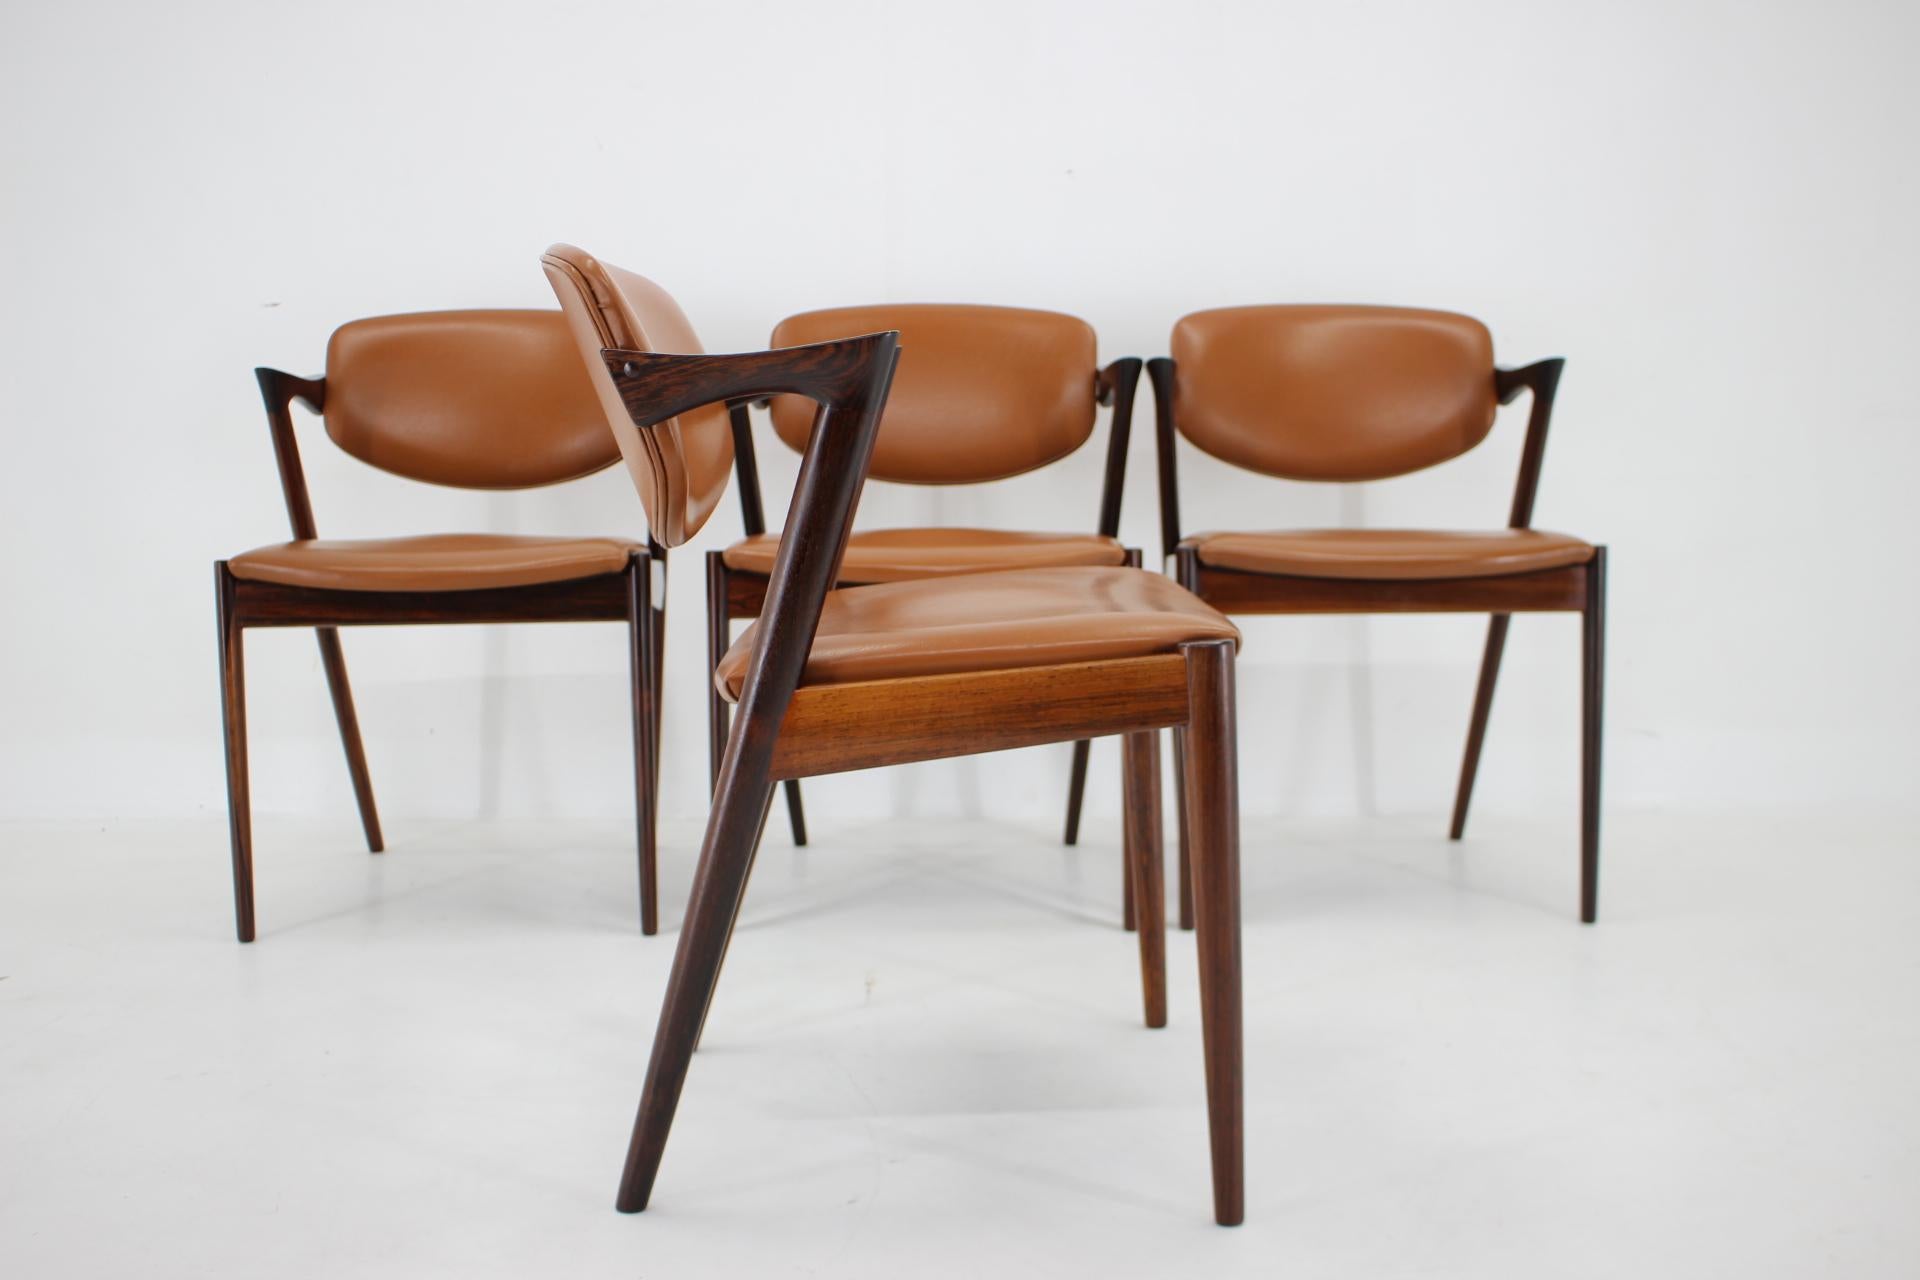 1960s Kai Kristiansen Model 42 Dining Chairs in Palisander, set of 4 For Sale 4